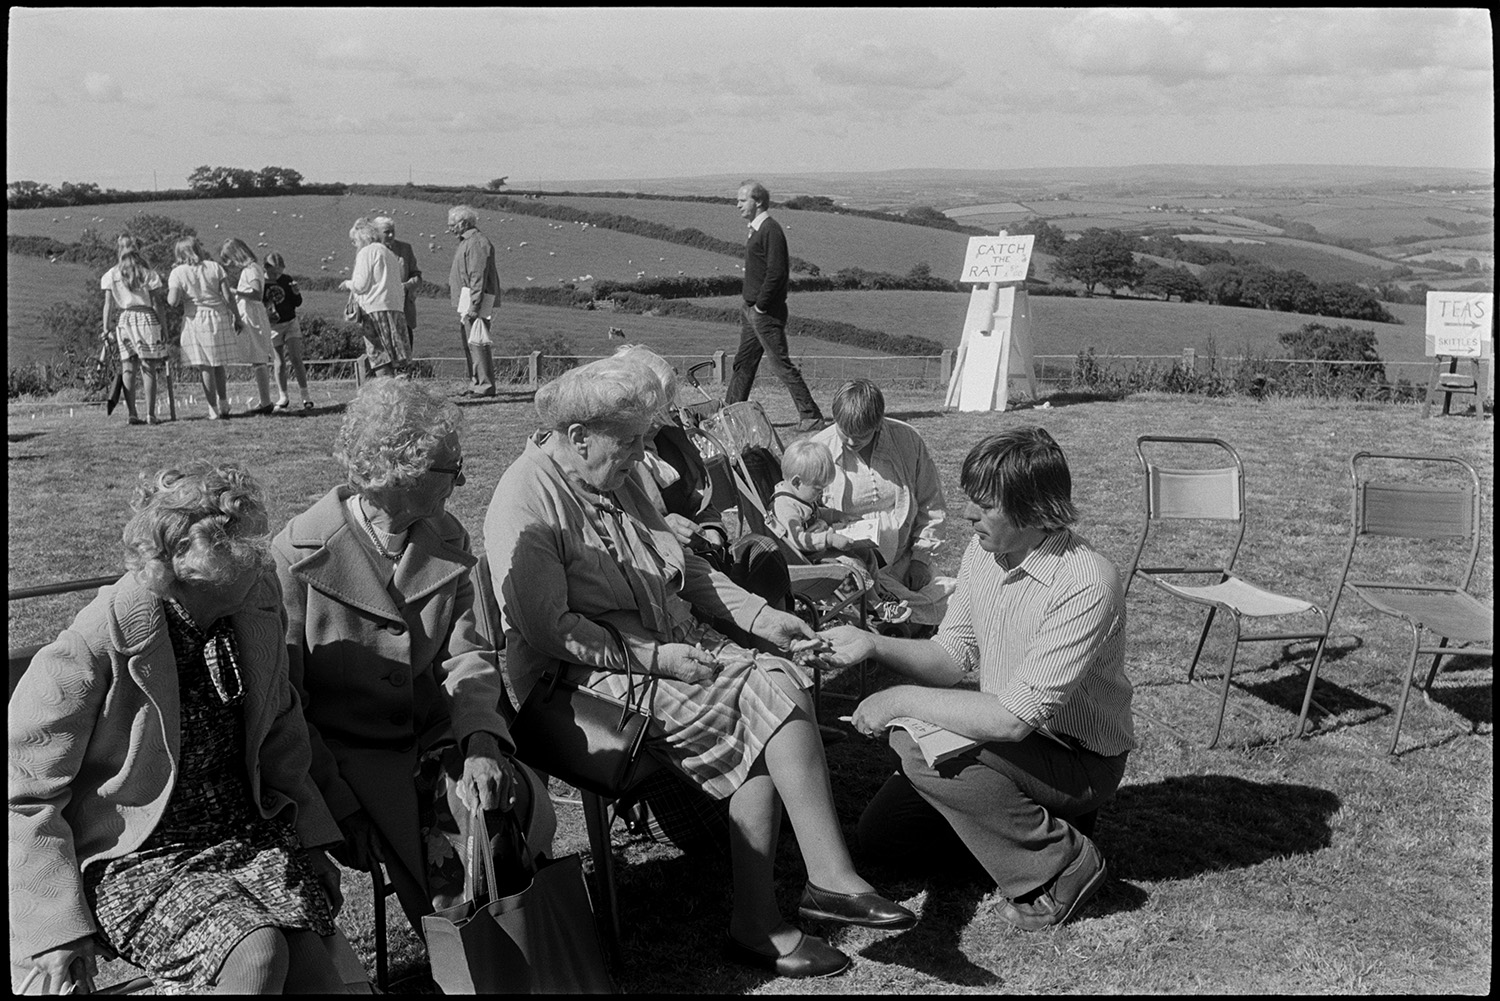 Man selling raffle tickets to elderly women at fete. 
[A man selling raffle tickets to women, including Mary Pickard and Mrs Piddler, at Atherington church fete held at the vicarage. The women are sat on chairs on the grass. A 'catch the rat' game can be seen in the background.]